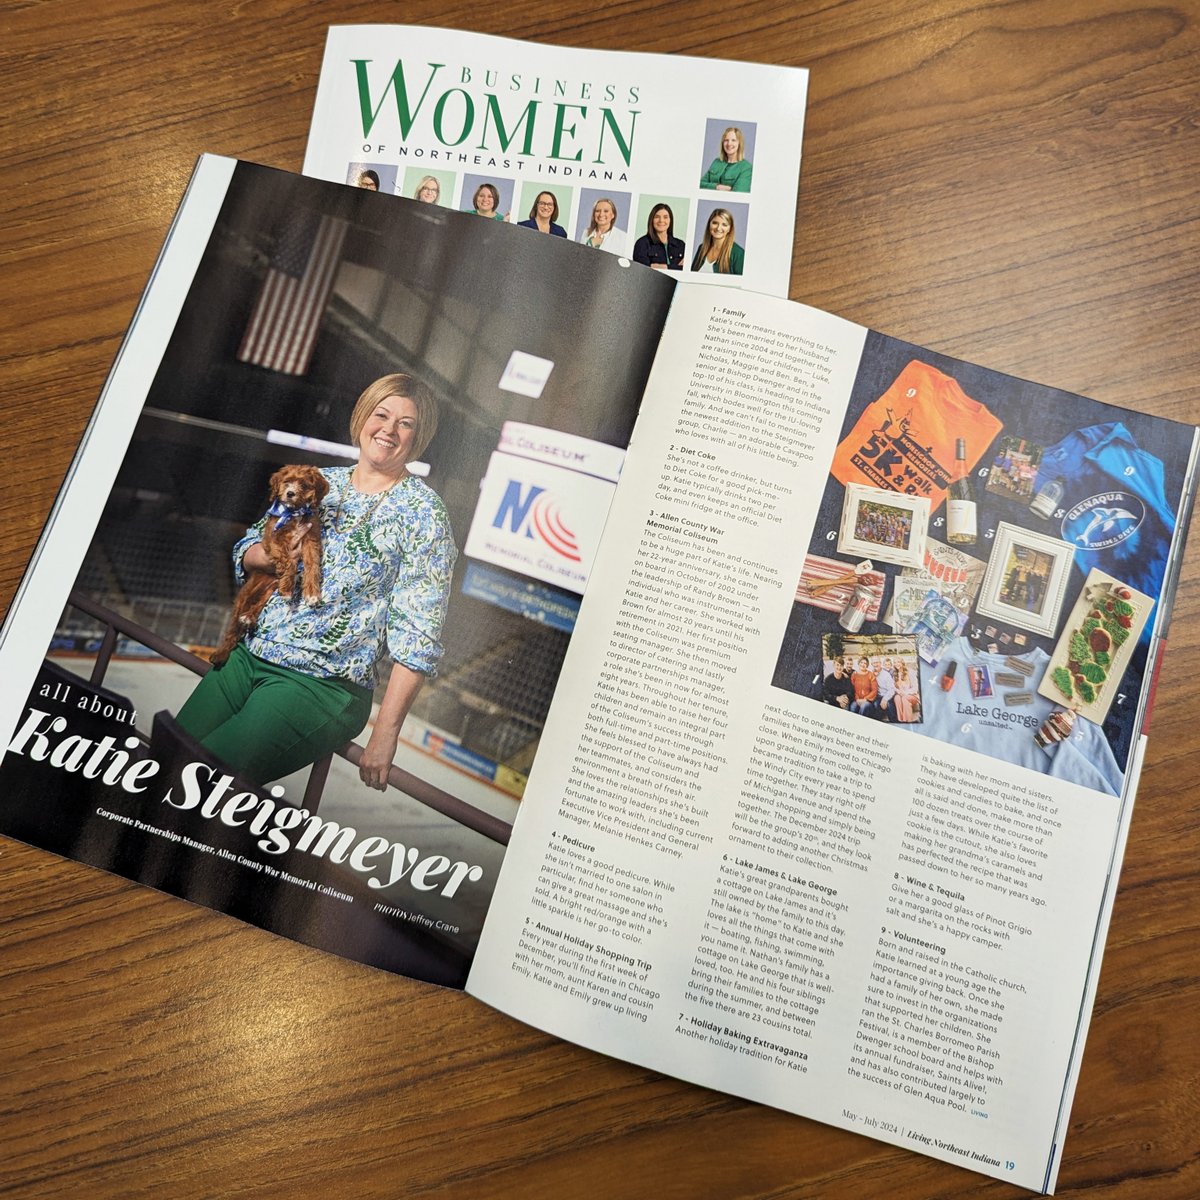 Look what came in the mail today! 💌 A very special THANK YOU to @BusinessPeopleM for the opportunity to feature some of our wonderful @acwmc ladies in this month's publications! Read online now: businesspeople.com/Digital-Magazi… Let us know how we can help you! 😊